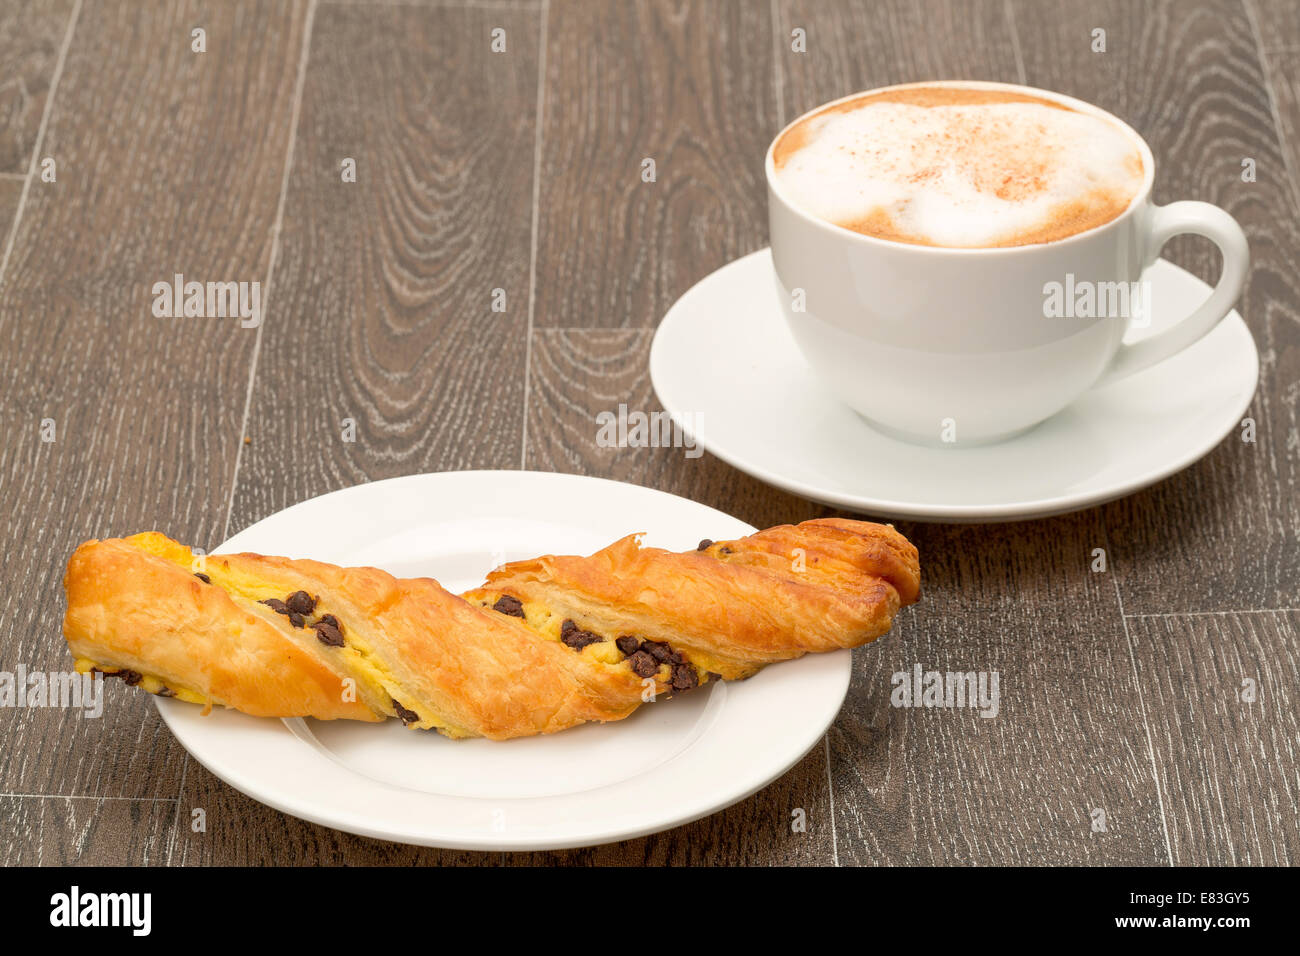 Authentic French chocolate twist pastry with a cappuccino coffee - studio shot Stock Photo